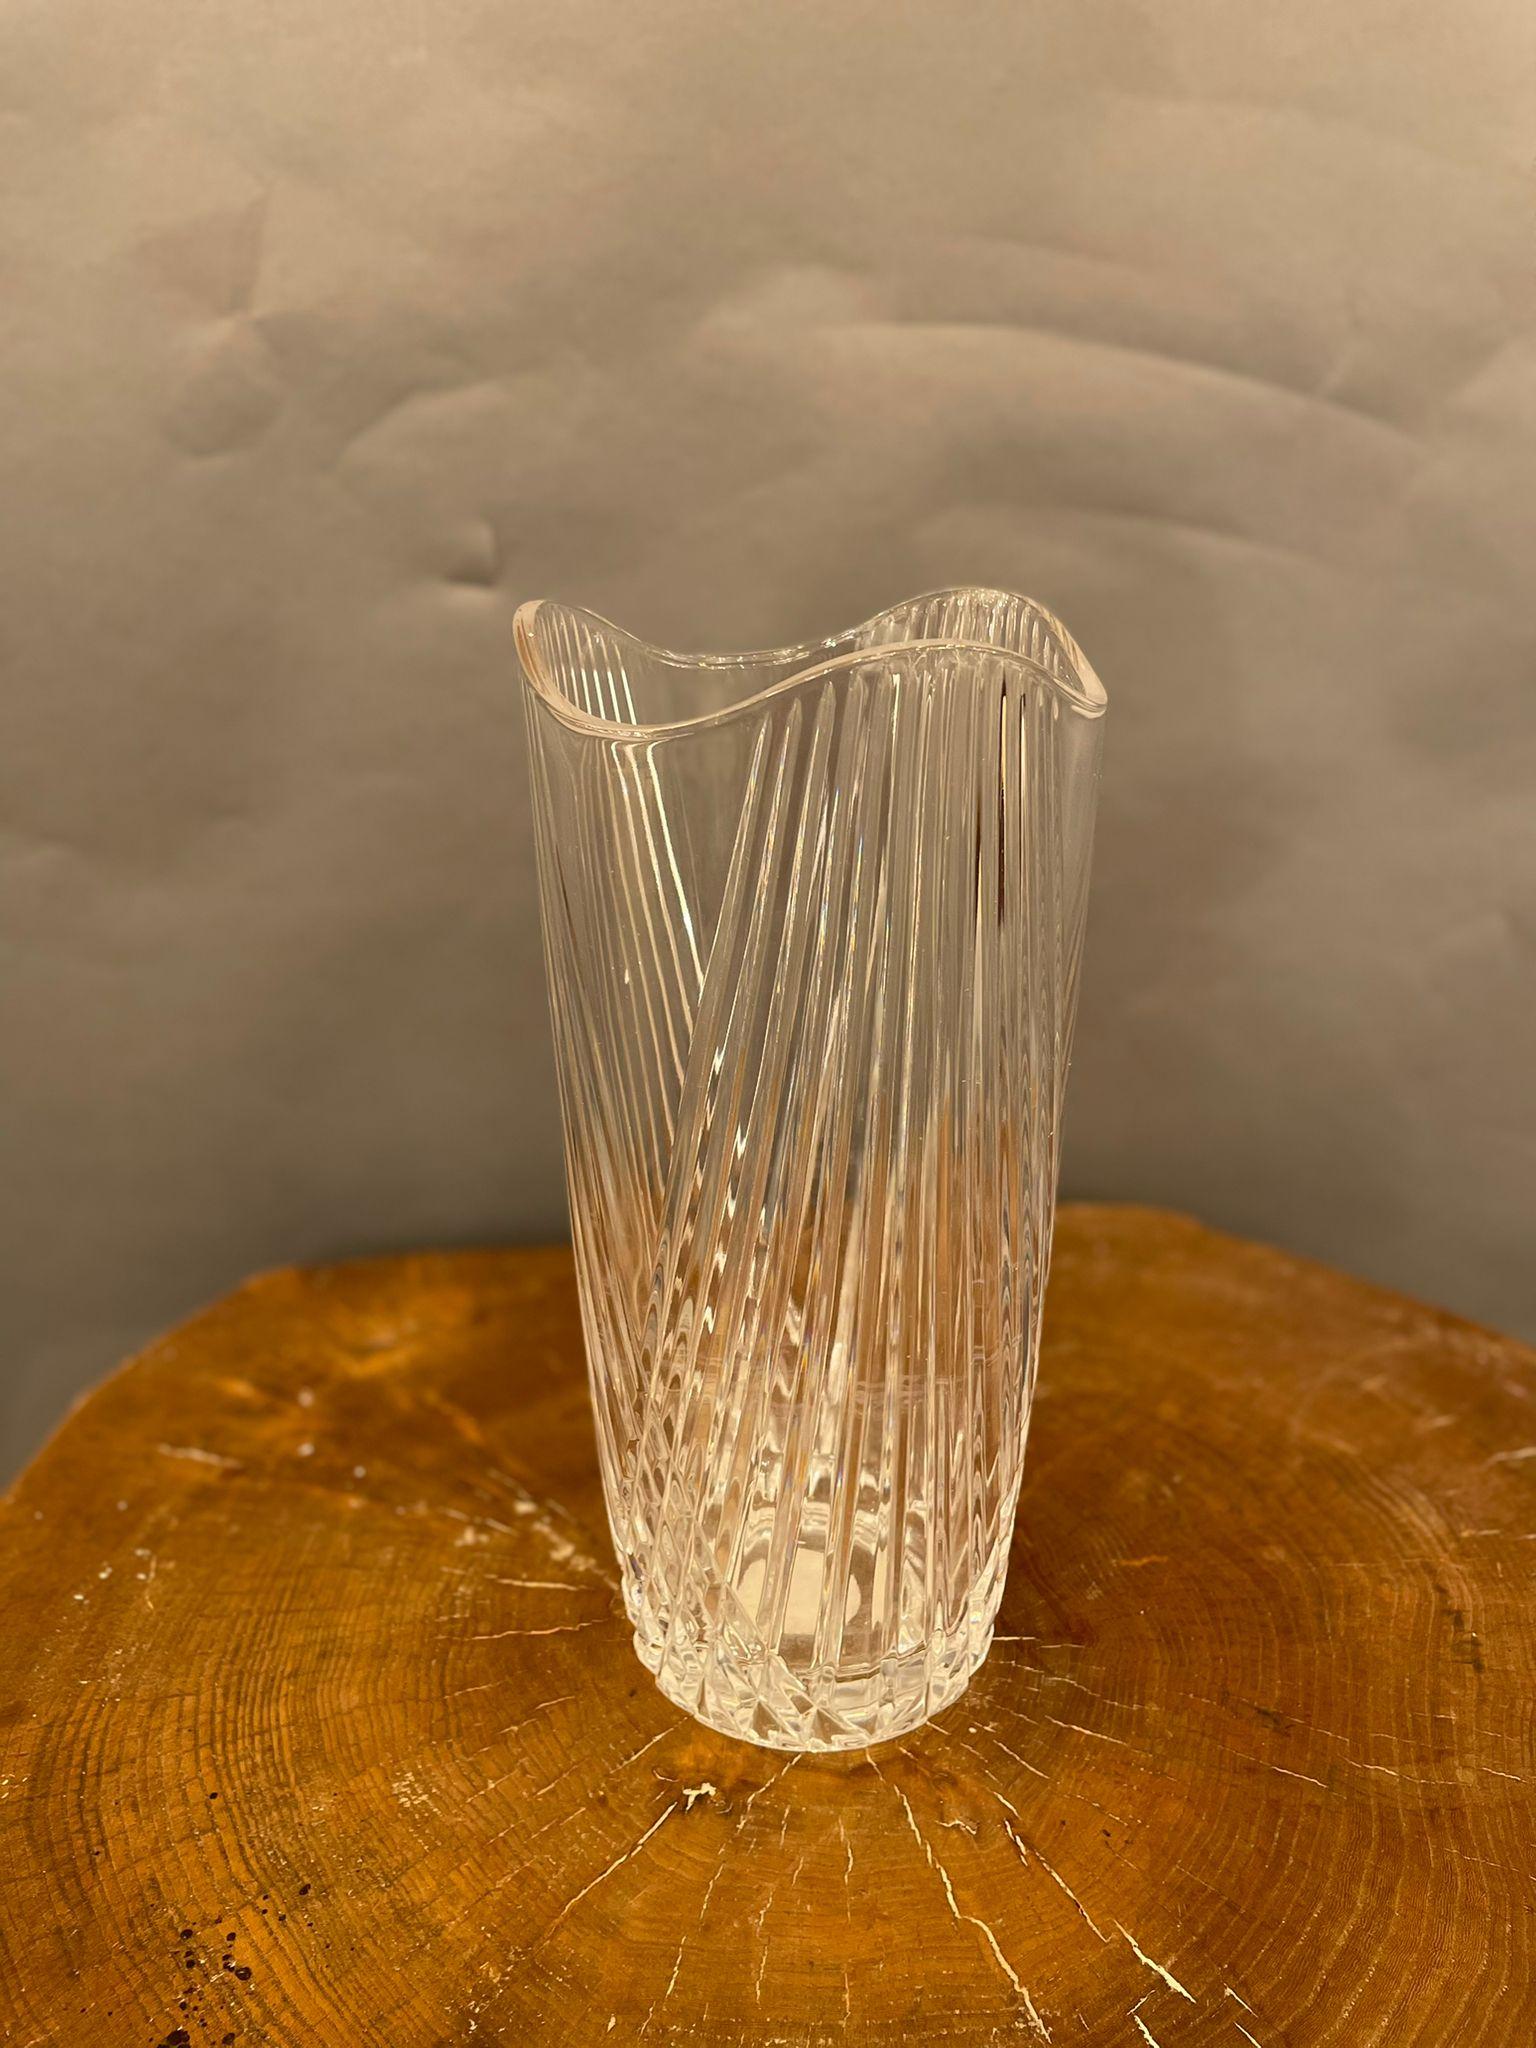 Flowers glass vase is a wonderful glass decorative object, realised during the 1970s. Very elegant transparent glass vase with wavy upper edges and striped decoration along the body.